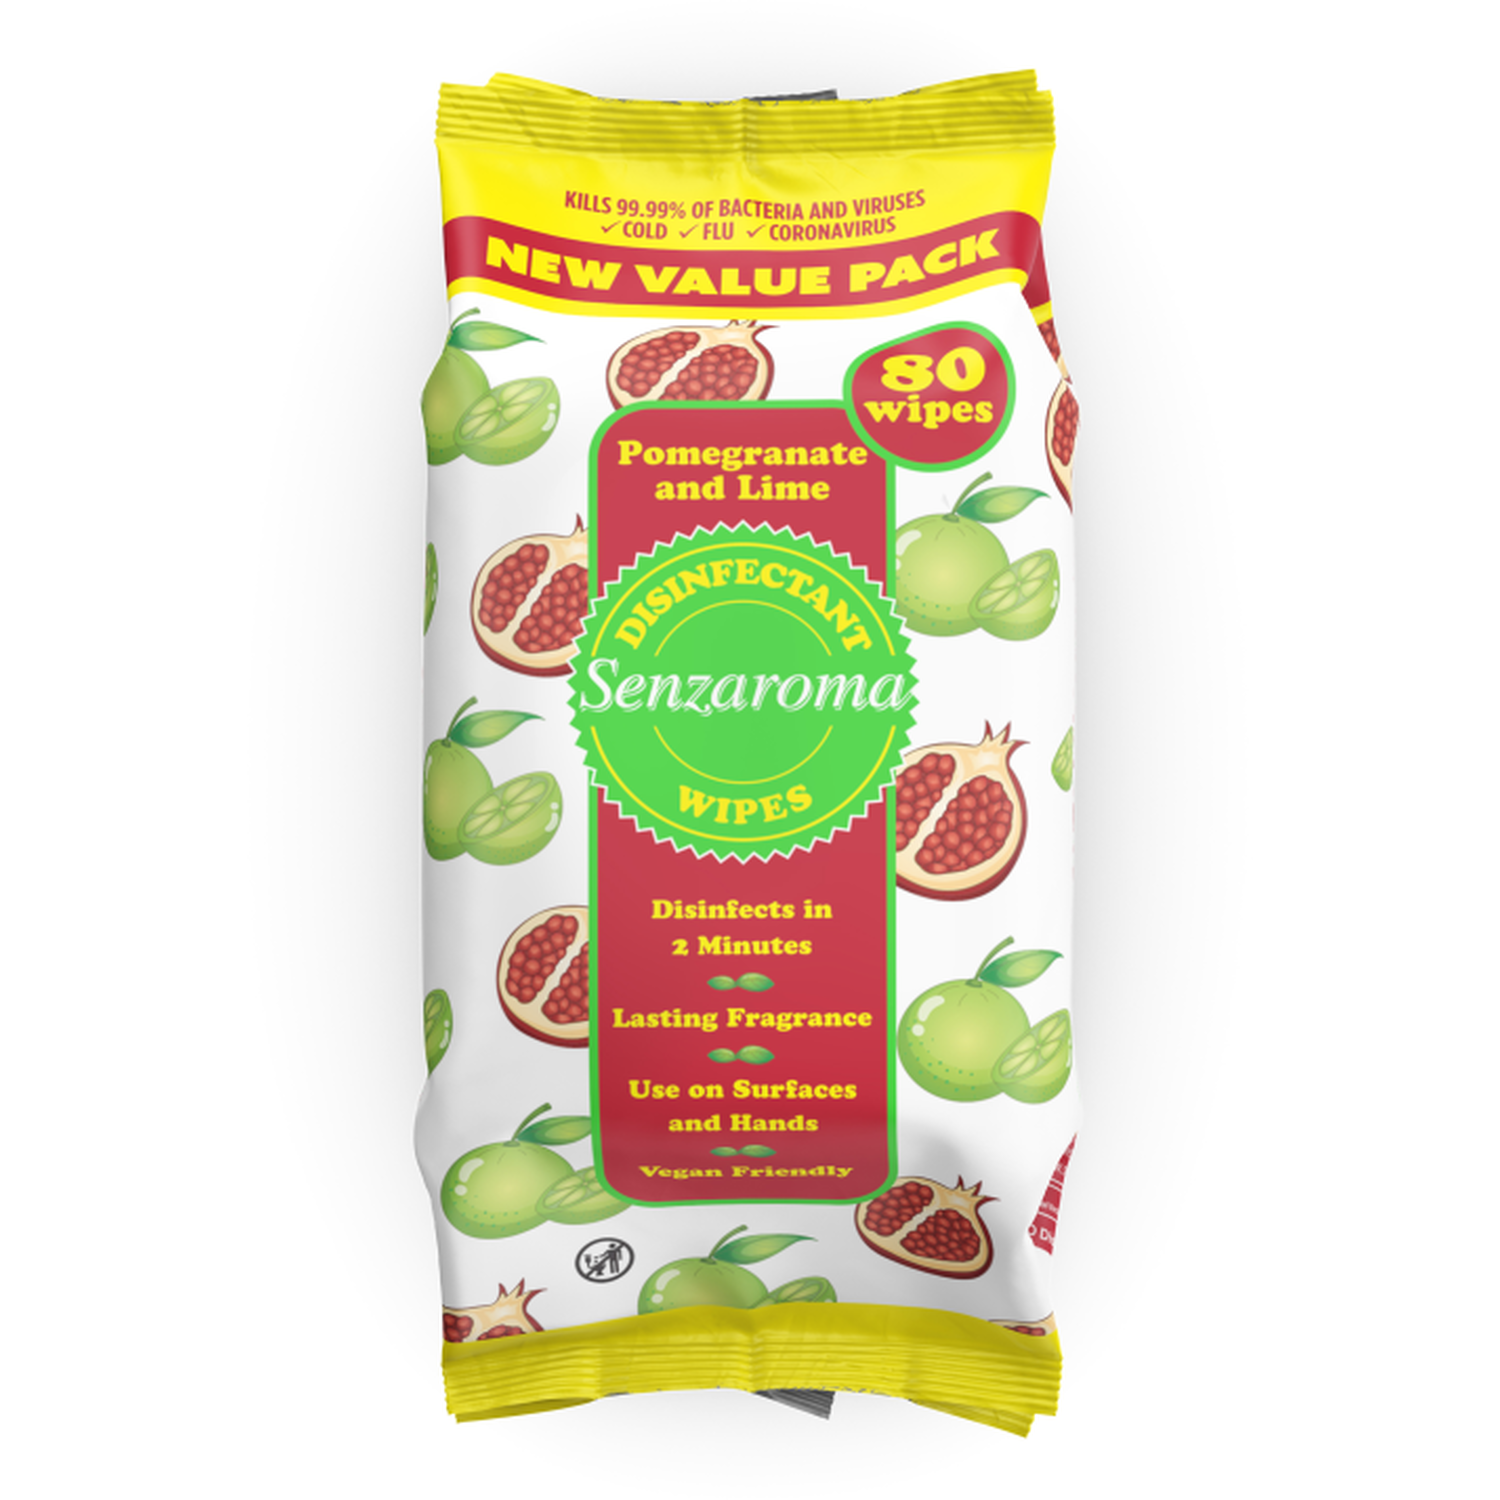 Pack of 80 Senzaroma Wipes - Pomegranate and Lime Image